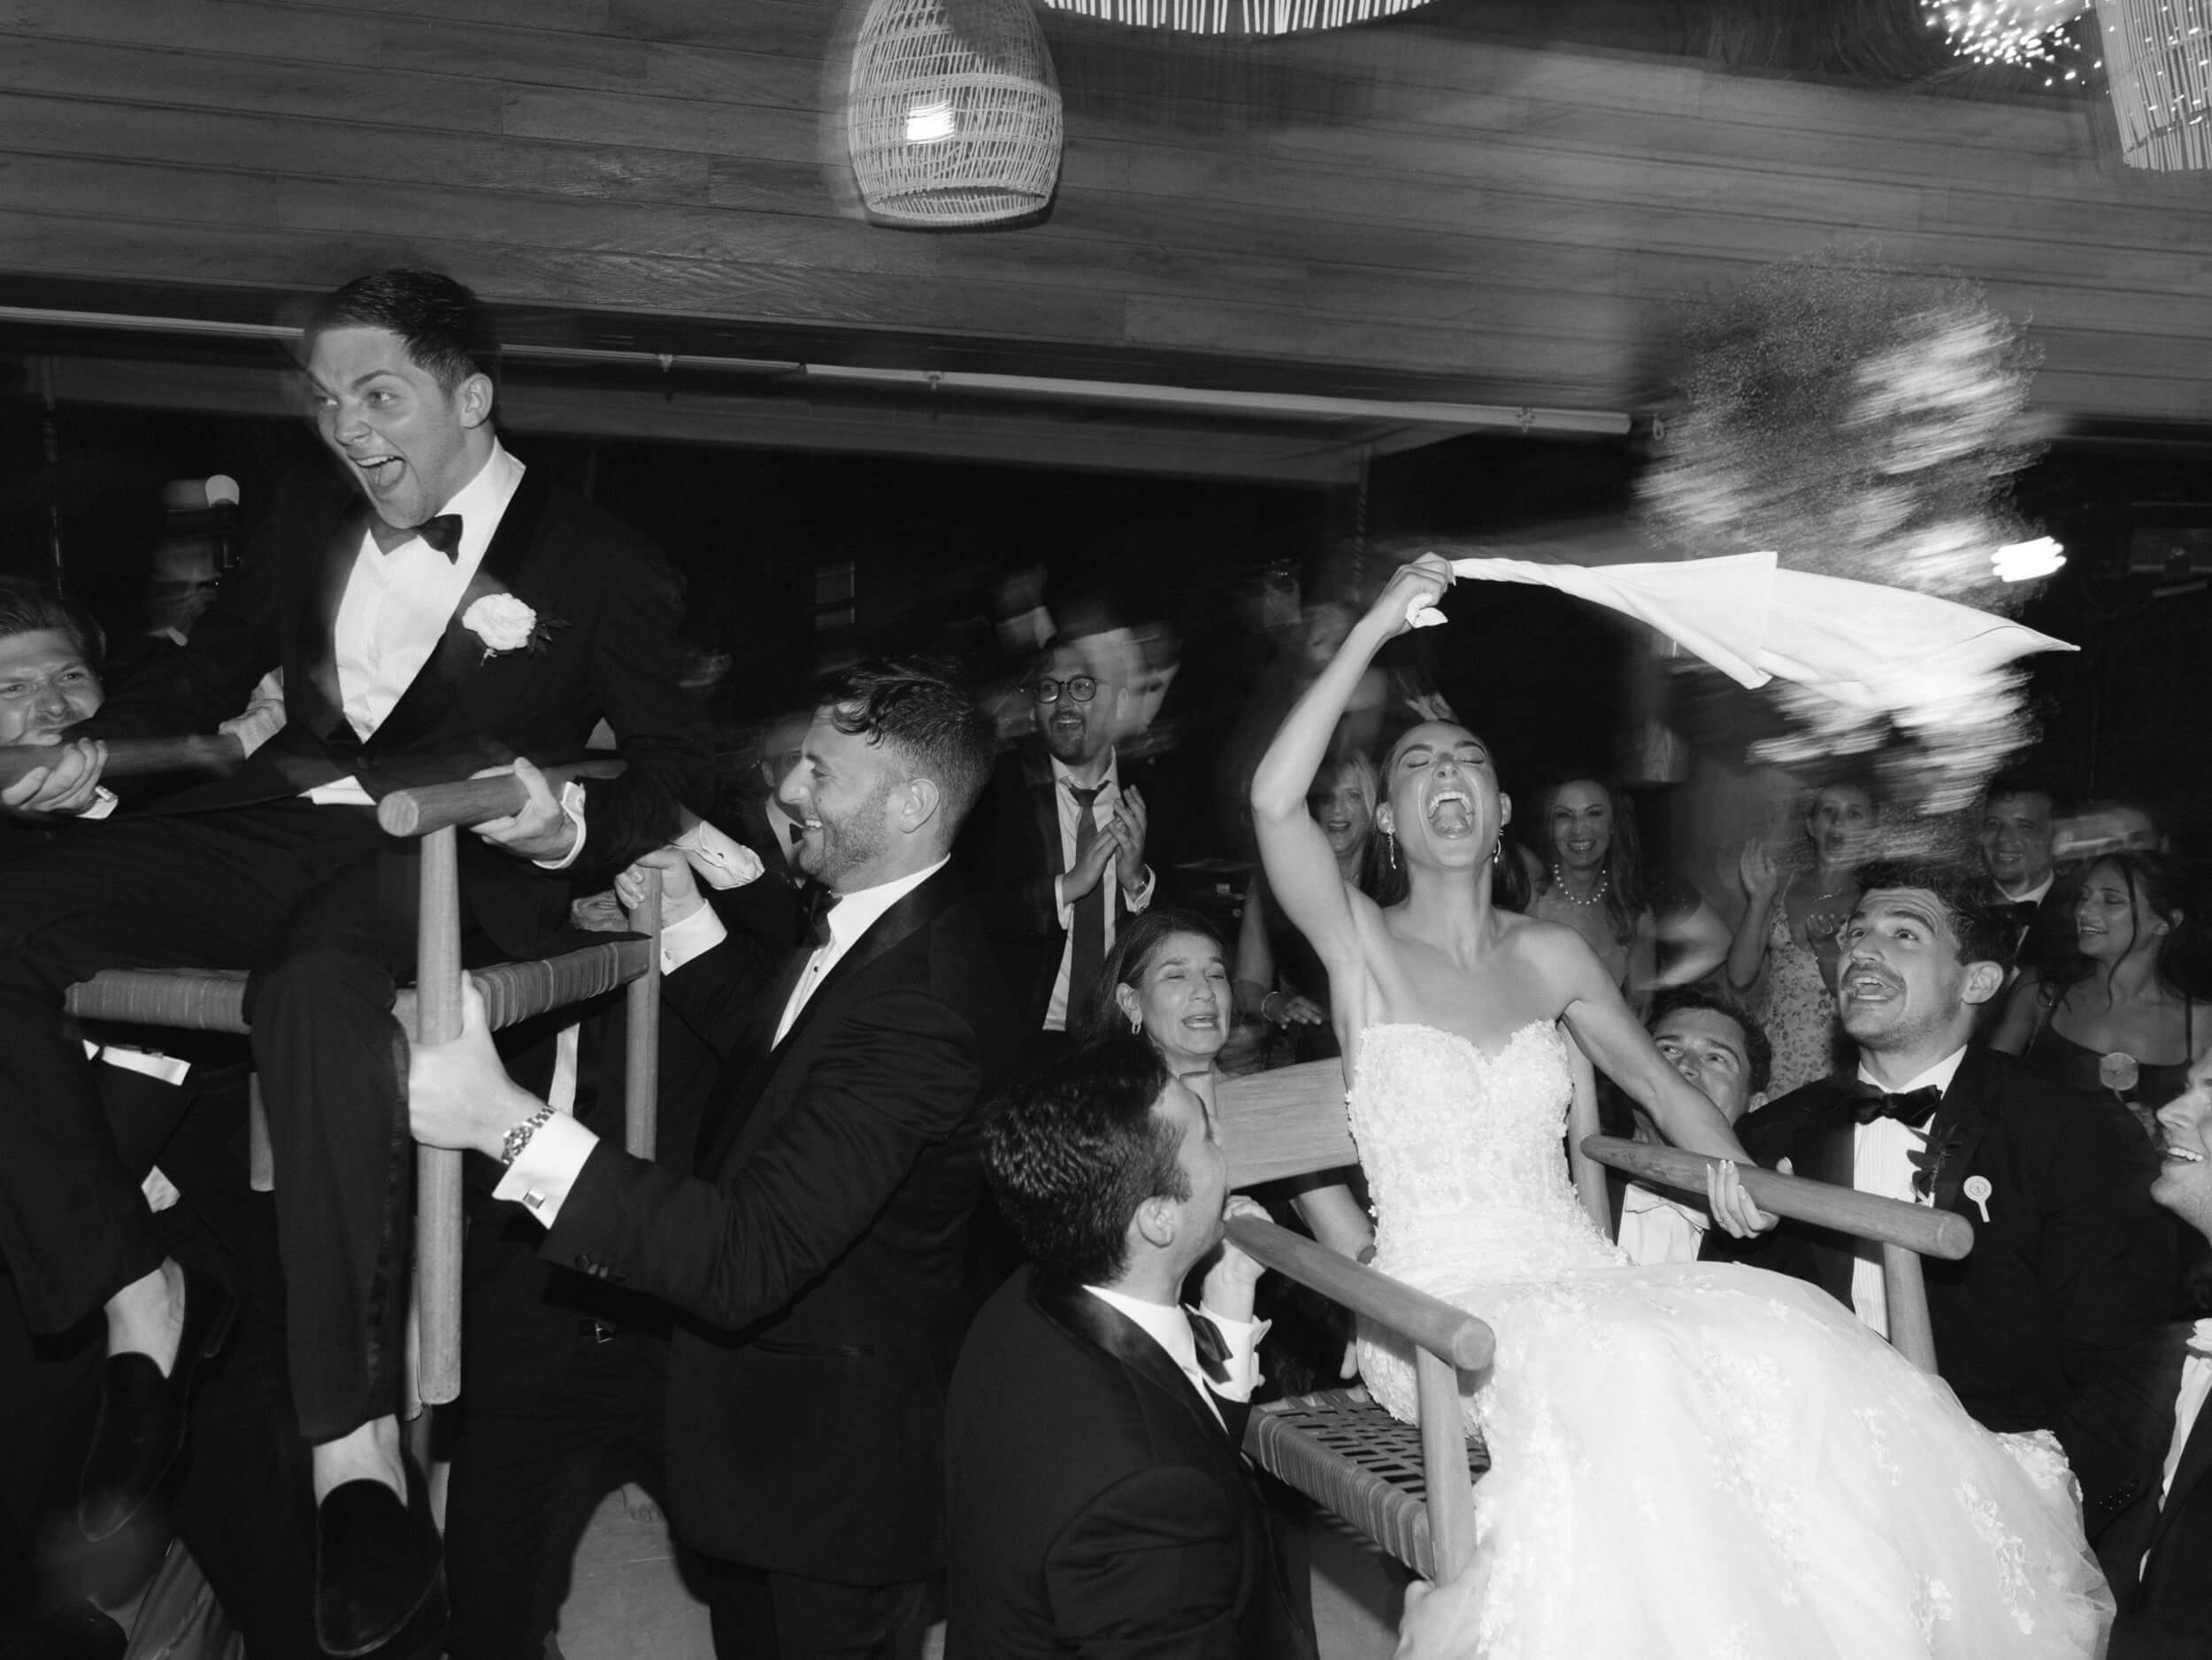 Danielle and Lucas laughing while being lifted into the air on chairs during 'hora', a Jewish wedding tradition